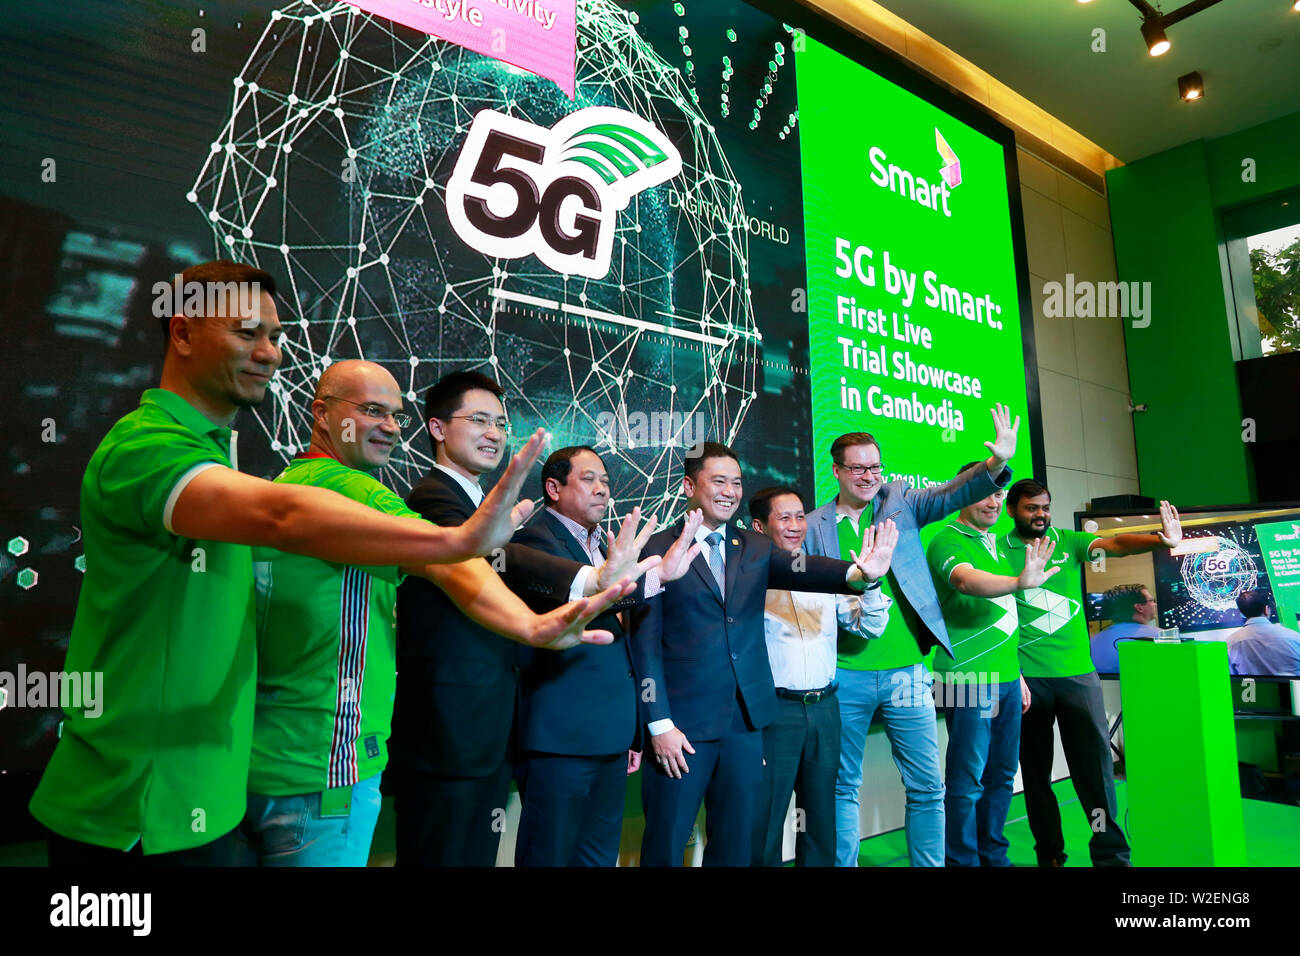 Phnom Penh, Cambodia. 8th July, 2019. People take part in the first 5G live trial showcase held by Smart Axiata in Phnom Penh, Cambodia, on July 8, 2019. Cambodia's leading mobile telecommunications company Smart Axiata has partnered with China's technology giant Huawei to build the 5G network in Cambodia, representatives of the two companies said on Monday. Credit: Phearum/Xinhua/Alamy Live News Stock Photo